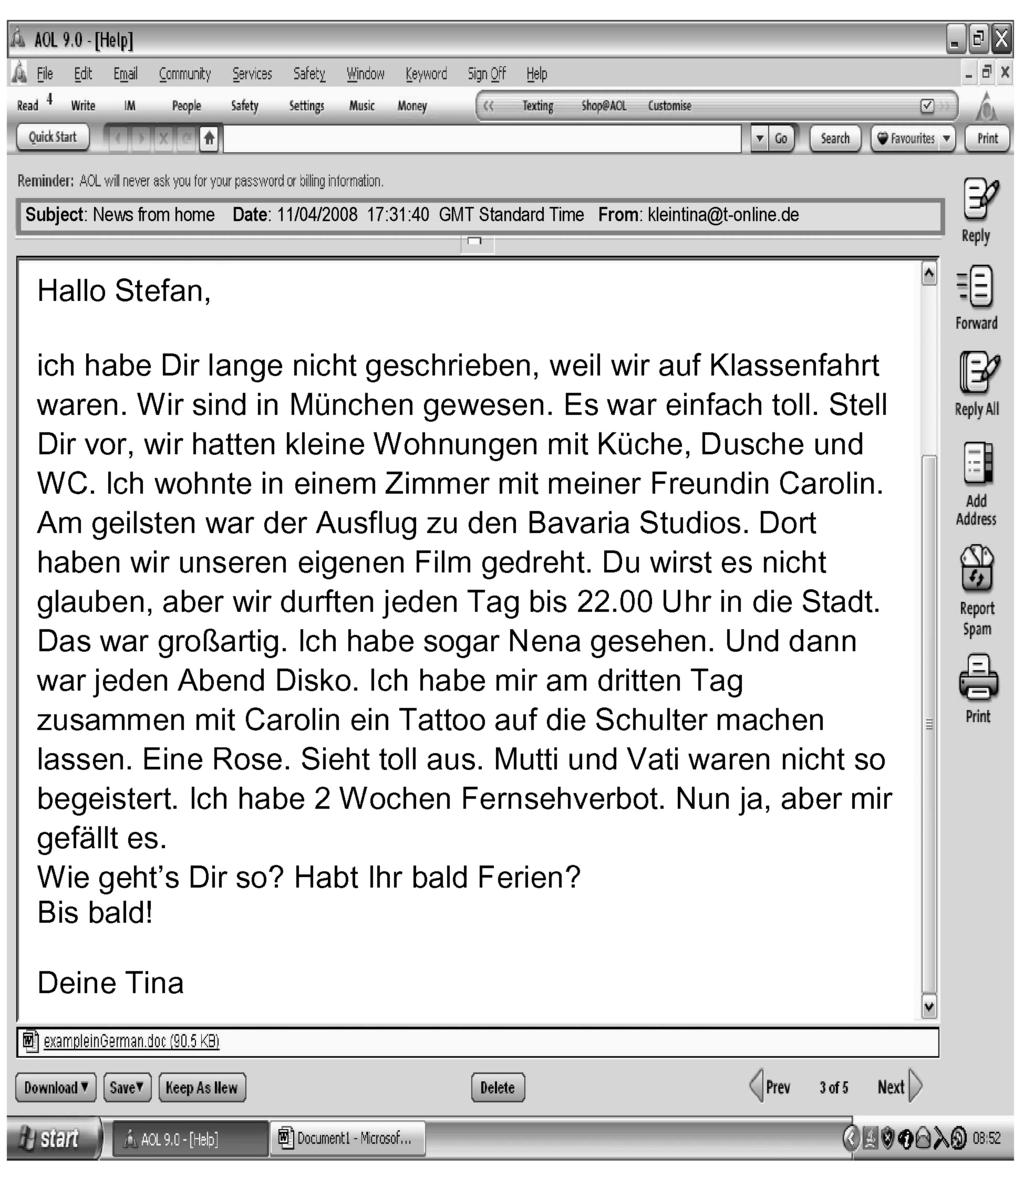 II.2 Mediation Stefan, a 16-year-old boy, is staying in England now. He is in close contact with his sister Tina by e-mail. Sometimes he tells his host family about the situation at home in Germany.